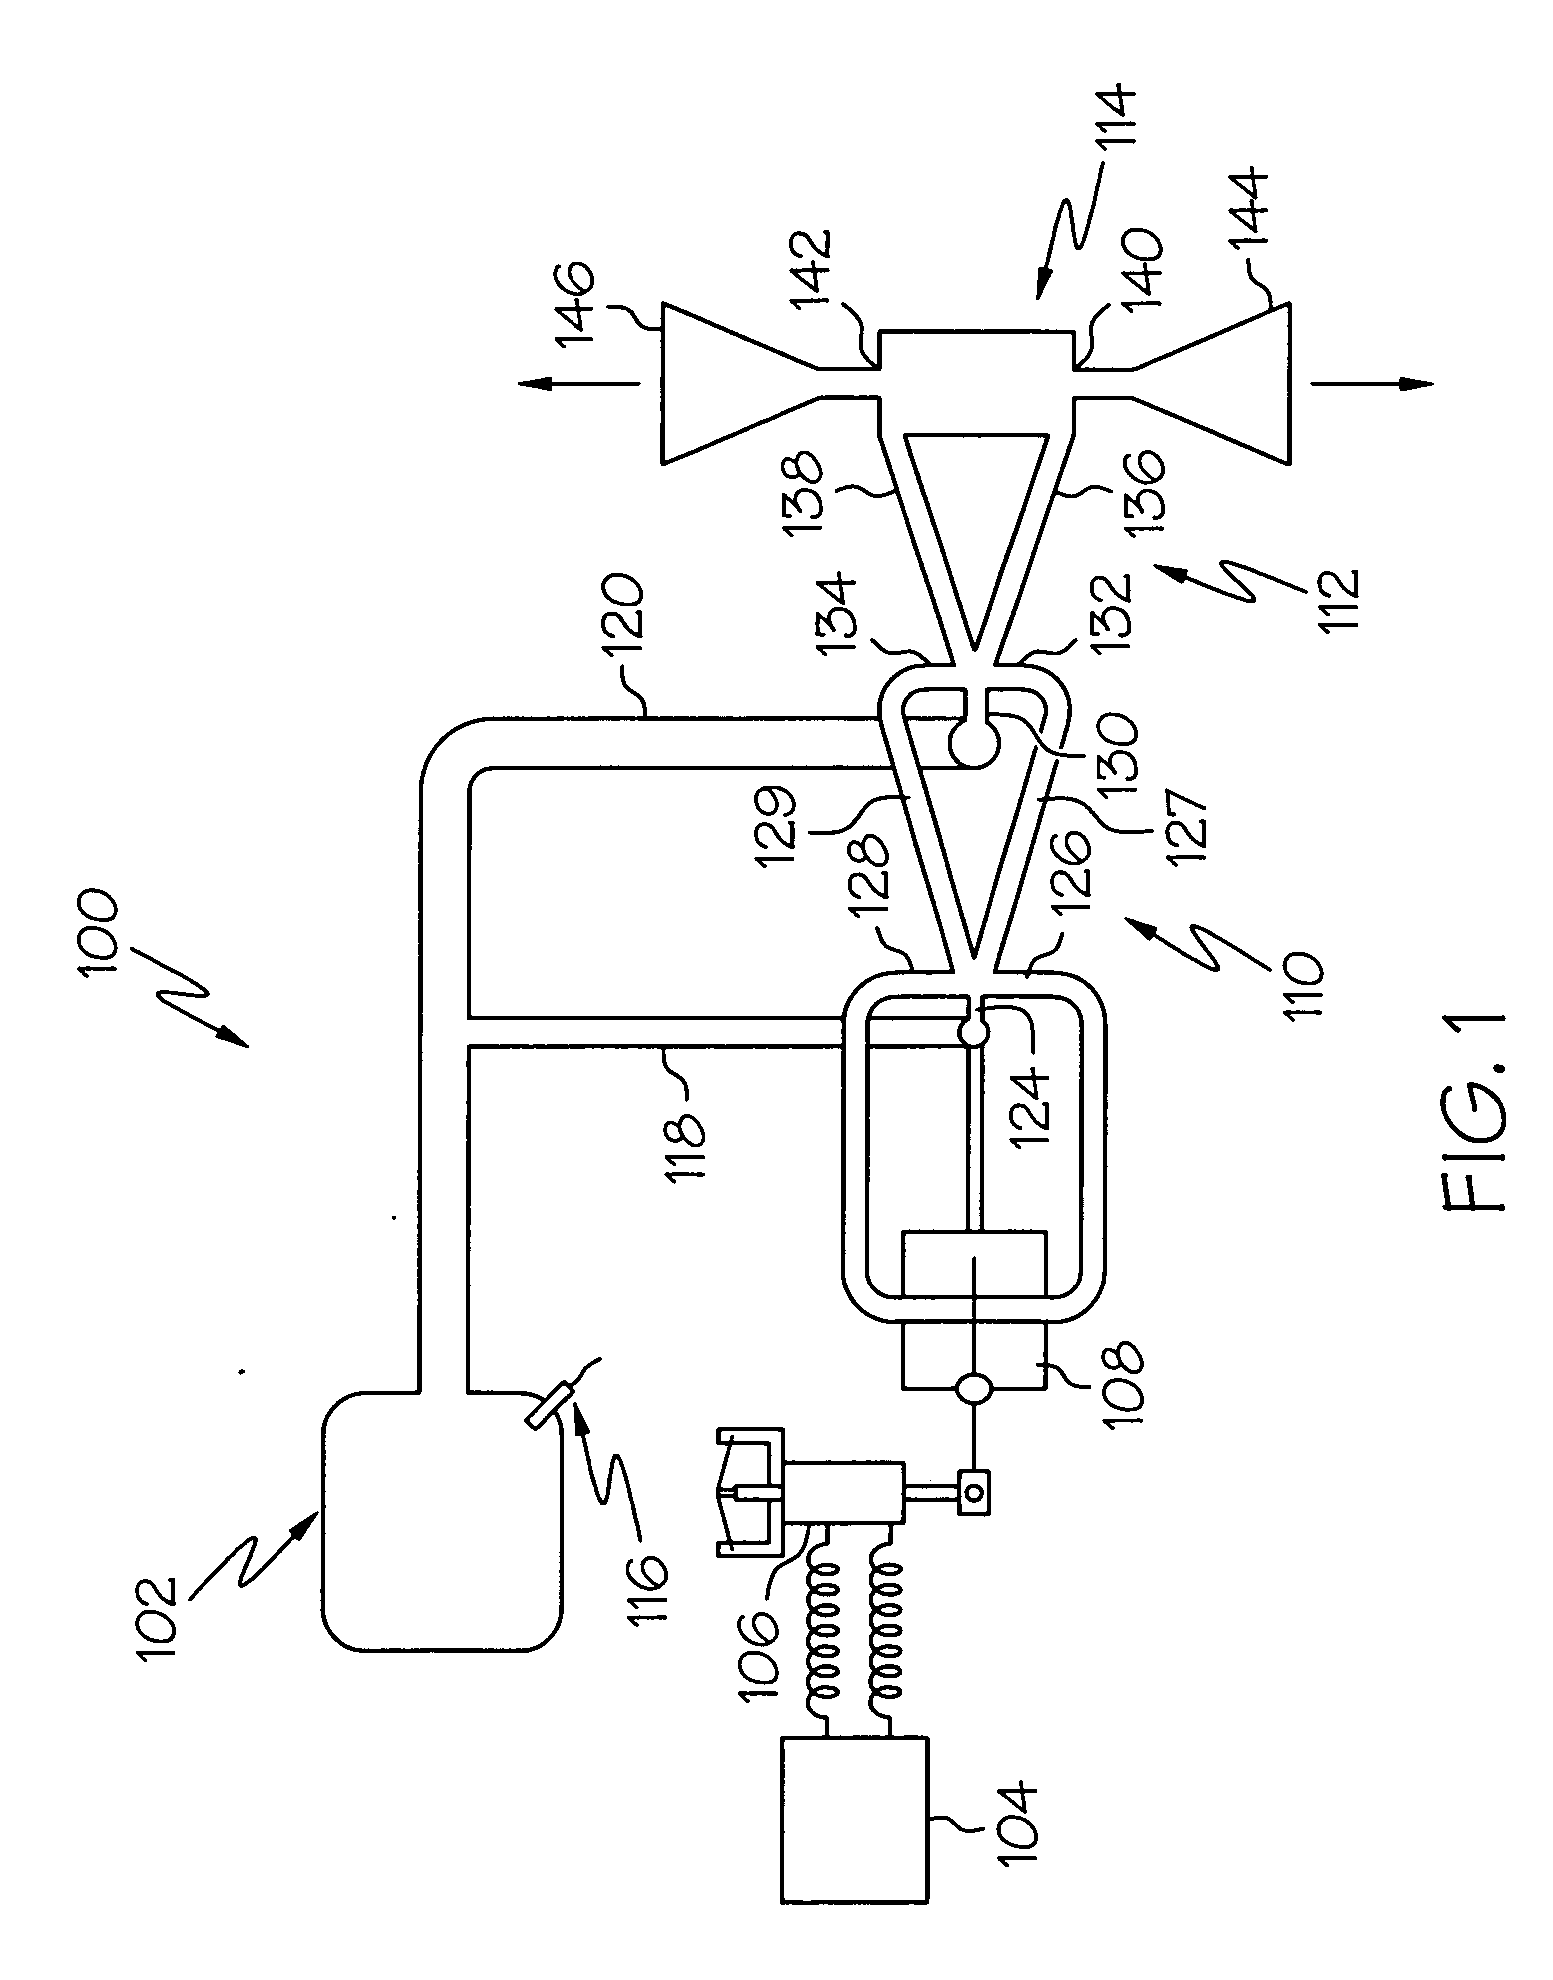 Diverter valve with multiple valve seat rings